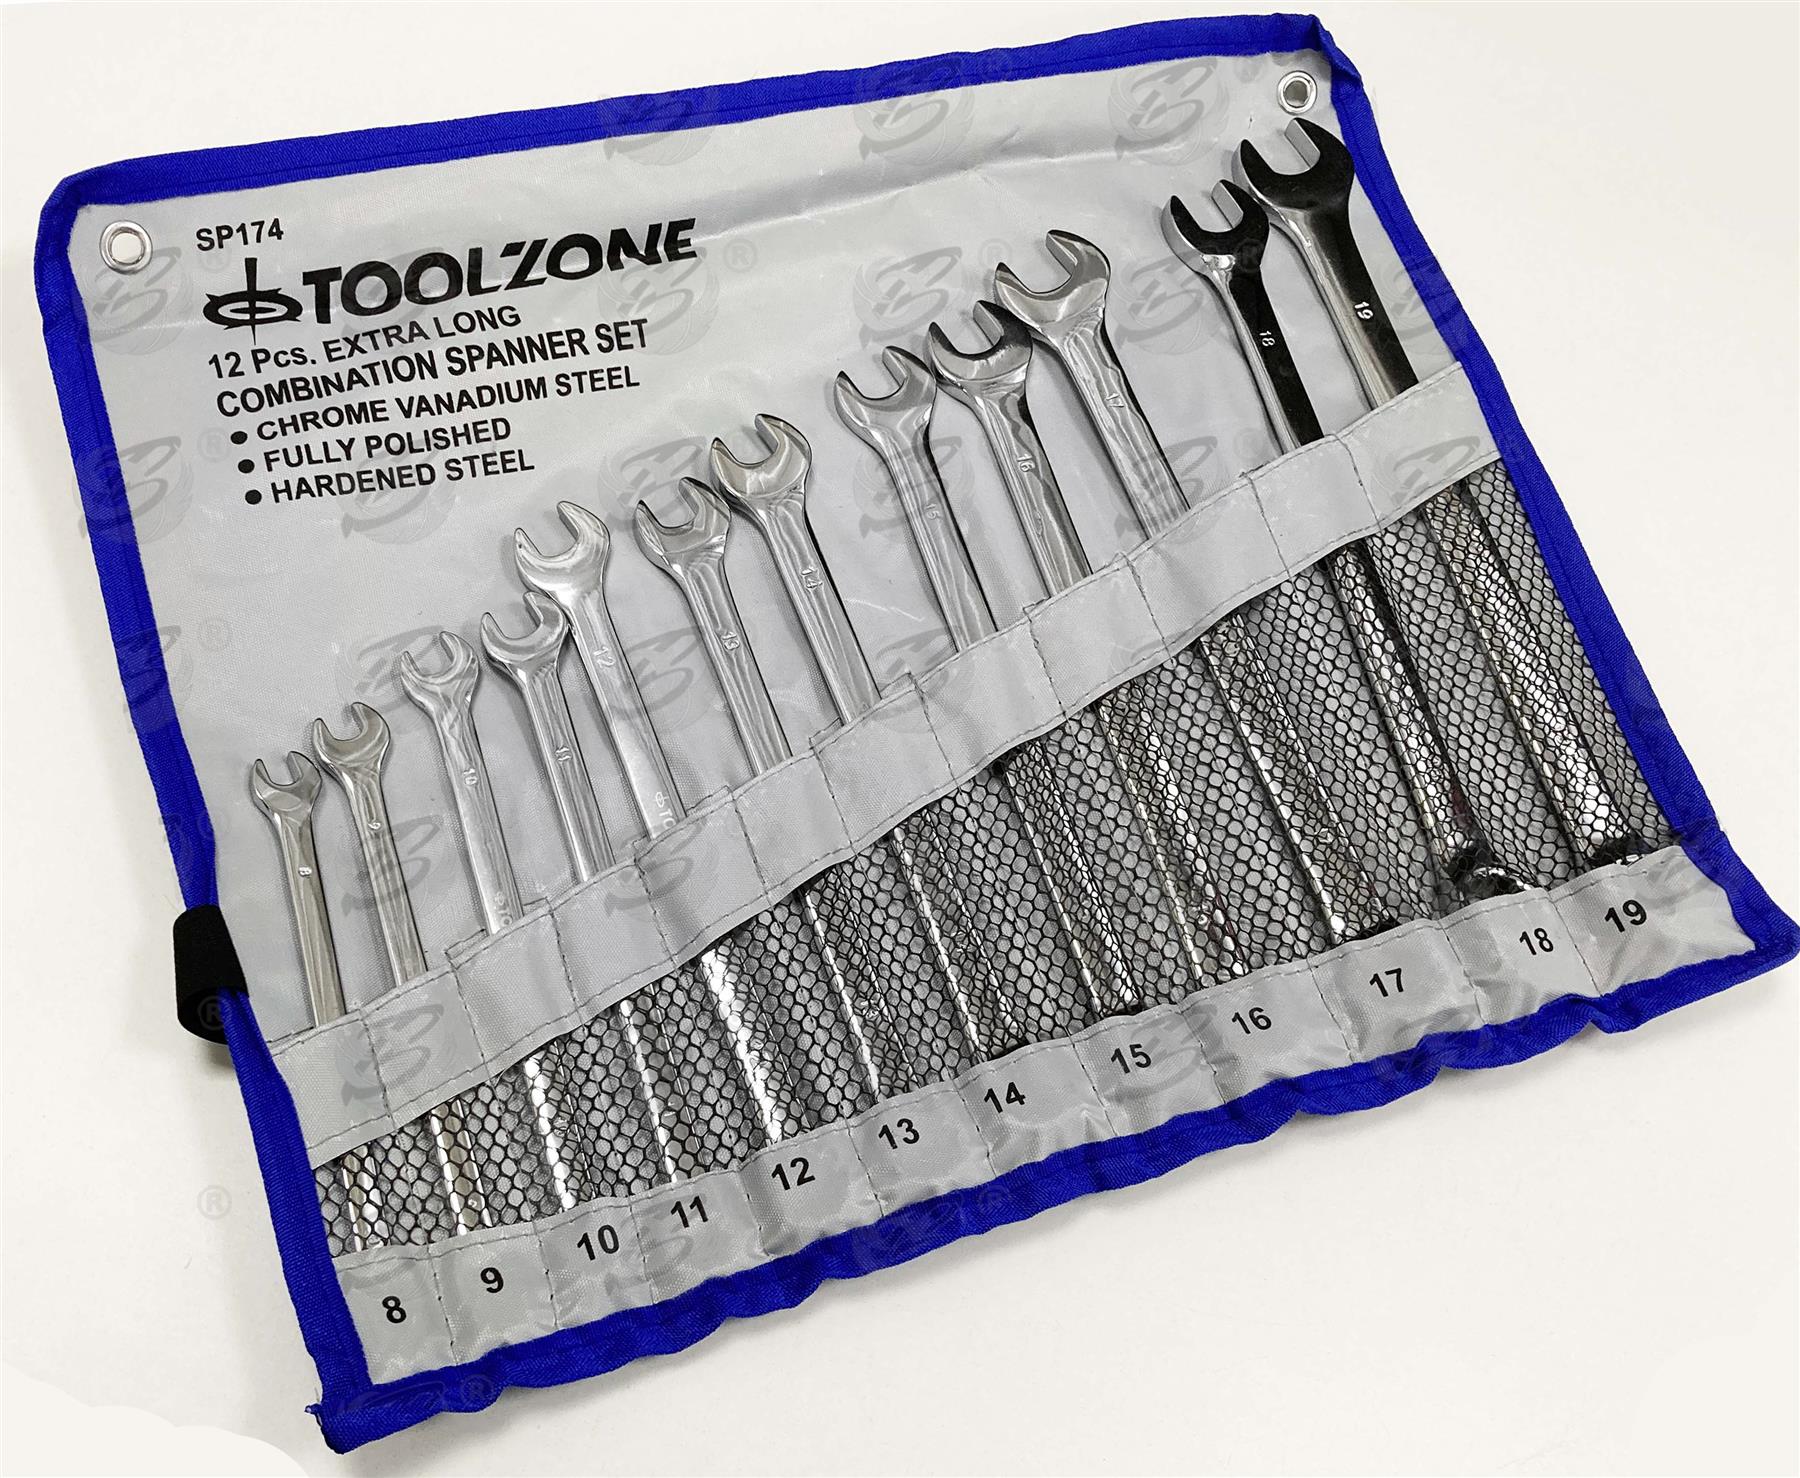 TOOLZONE 12PCS EXTRA LONG COMBINATION SPANNER SET 8MM - 19MM